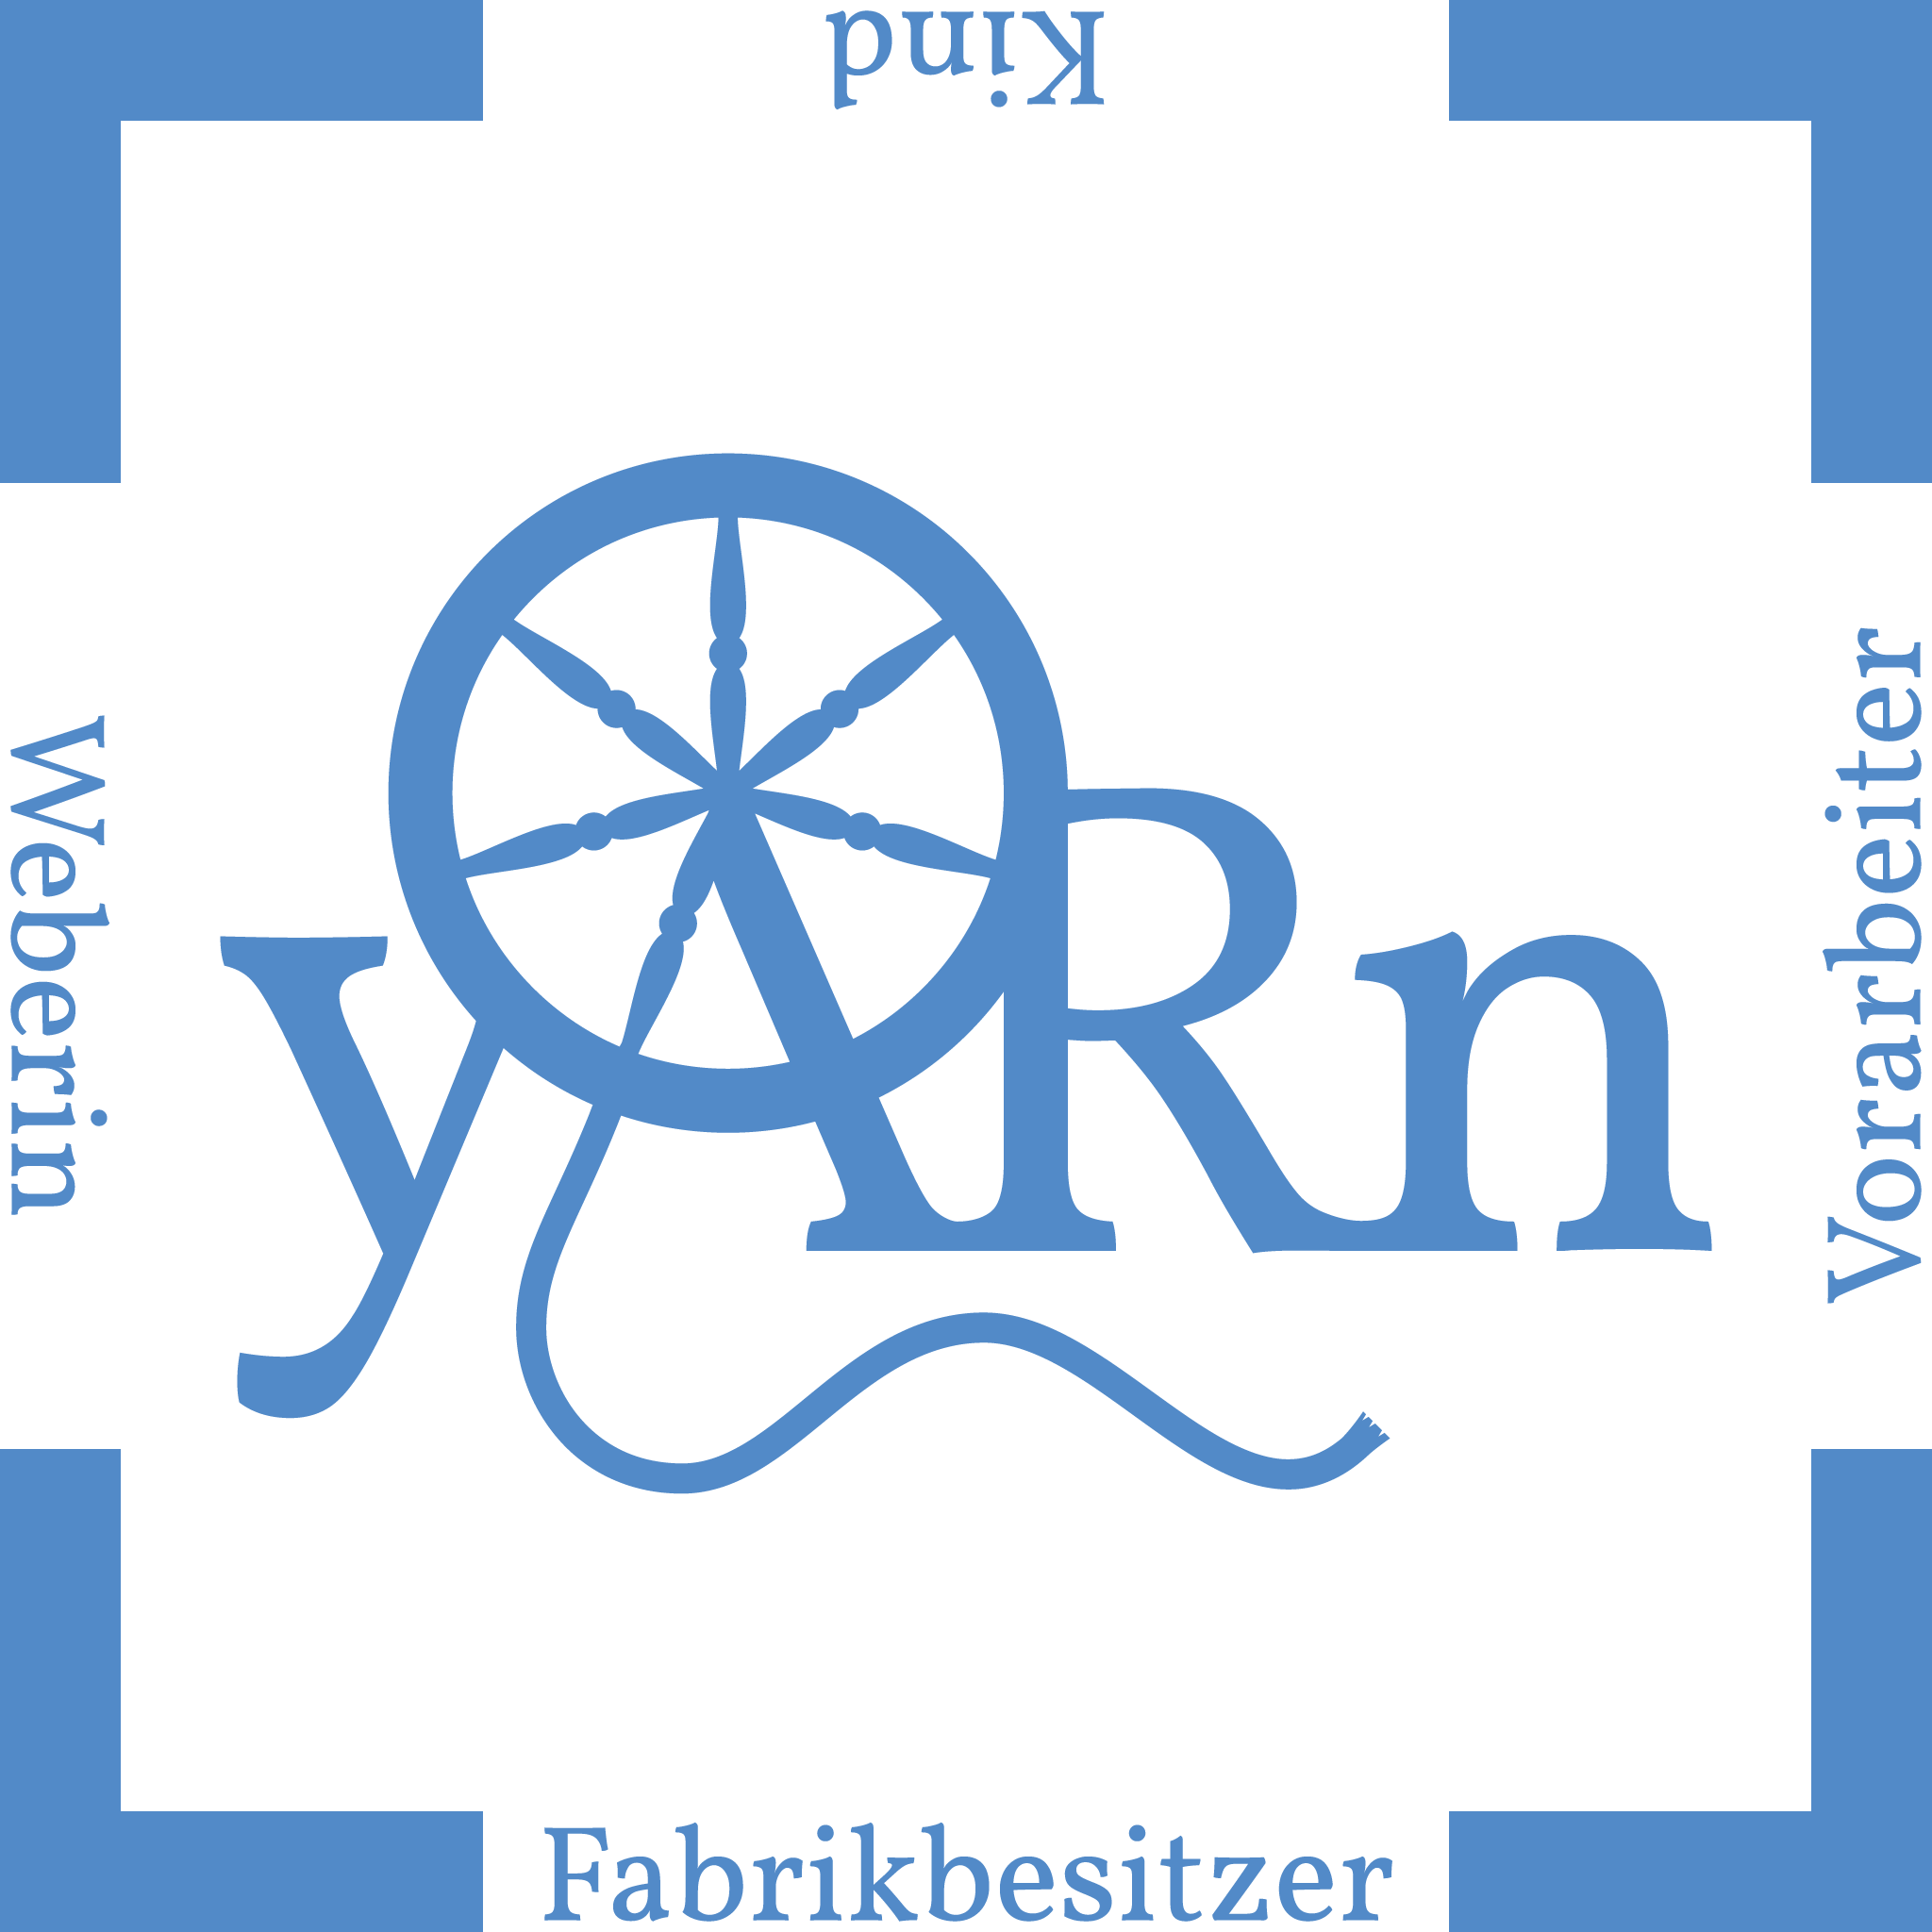 The marker for the AR scene shows the blue logo in the center (the word yARn, but the A consists of two spokes of a spinning wheel). At each side of the marker the role is written that the user takes on if he or she looks at the scene from this perspective: the factory owner, the foreman, the child or the weaver.